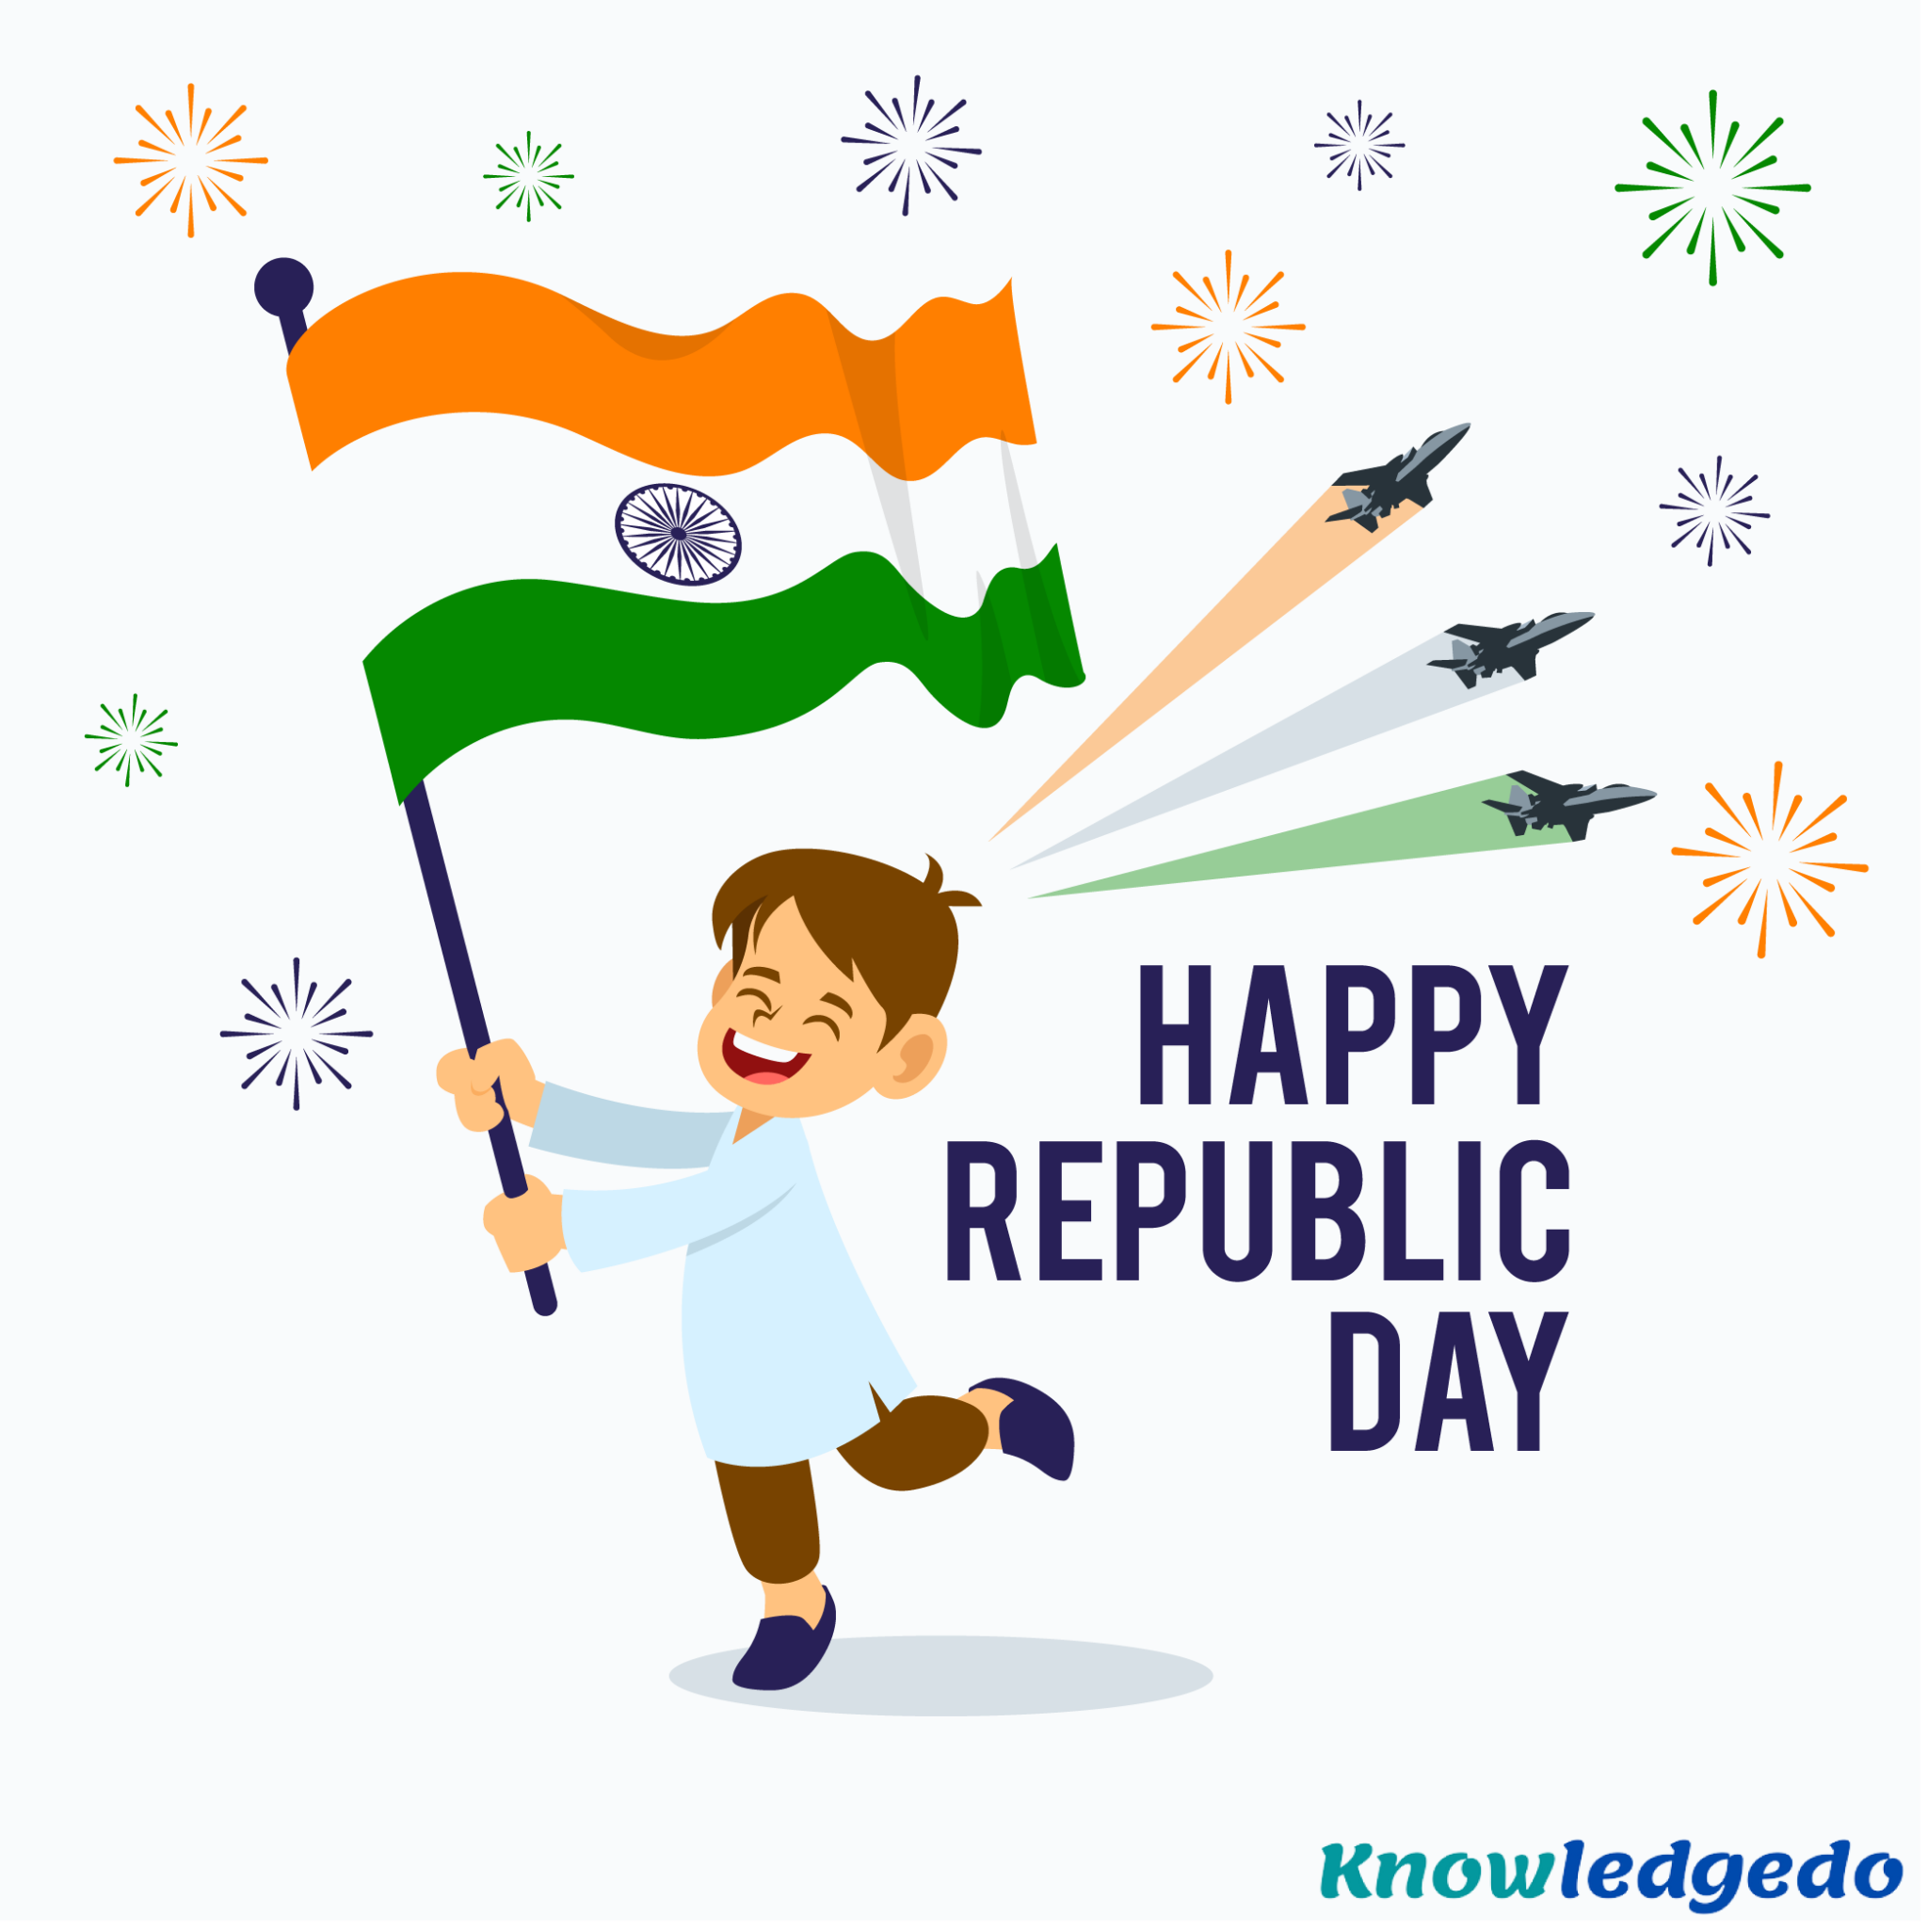 10 lines on Republic Day in English